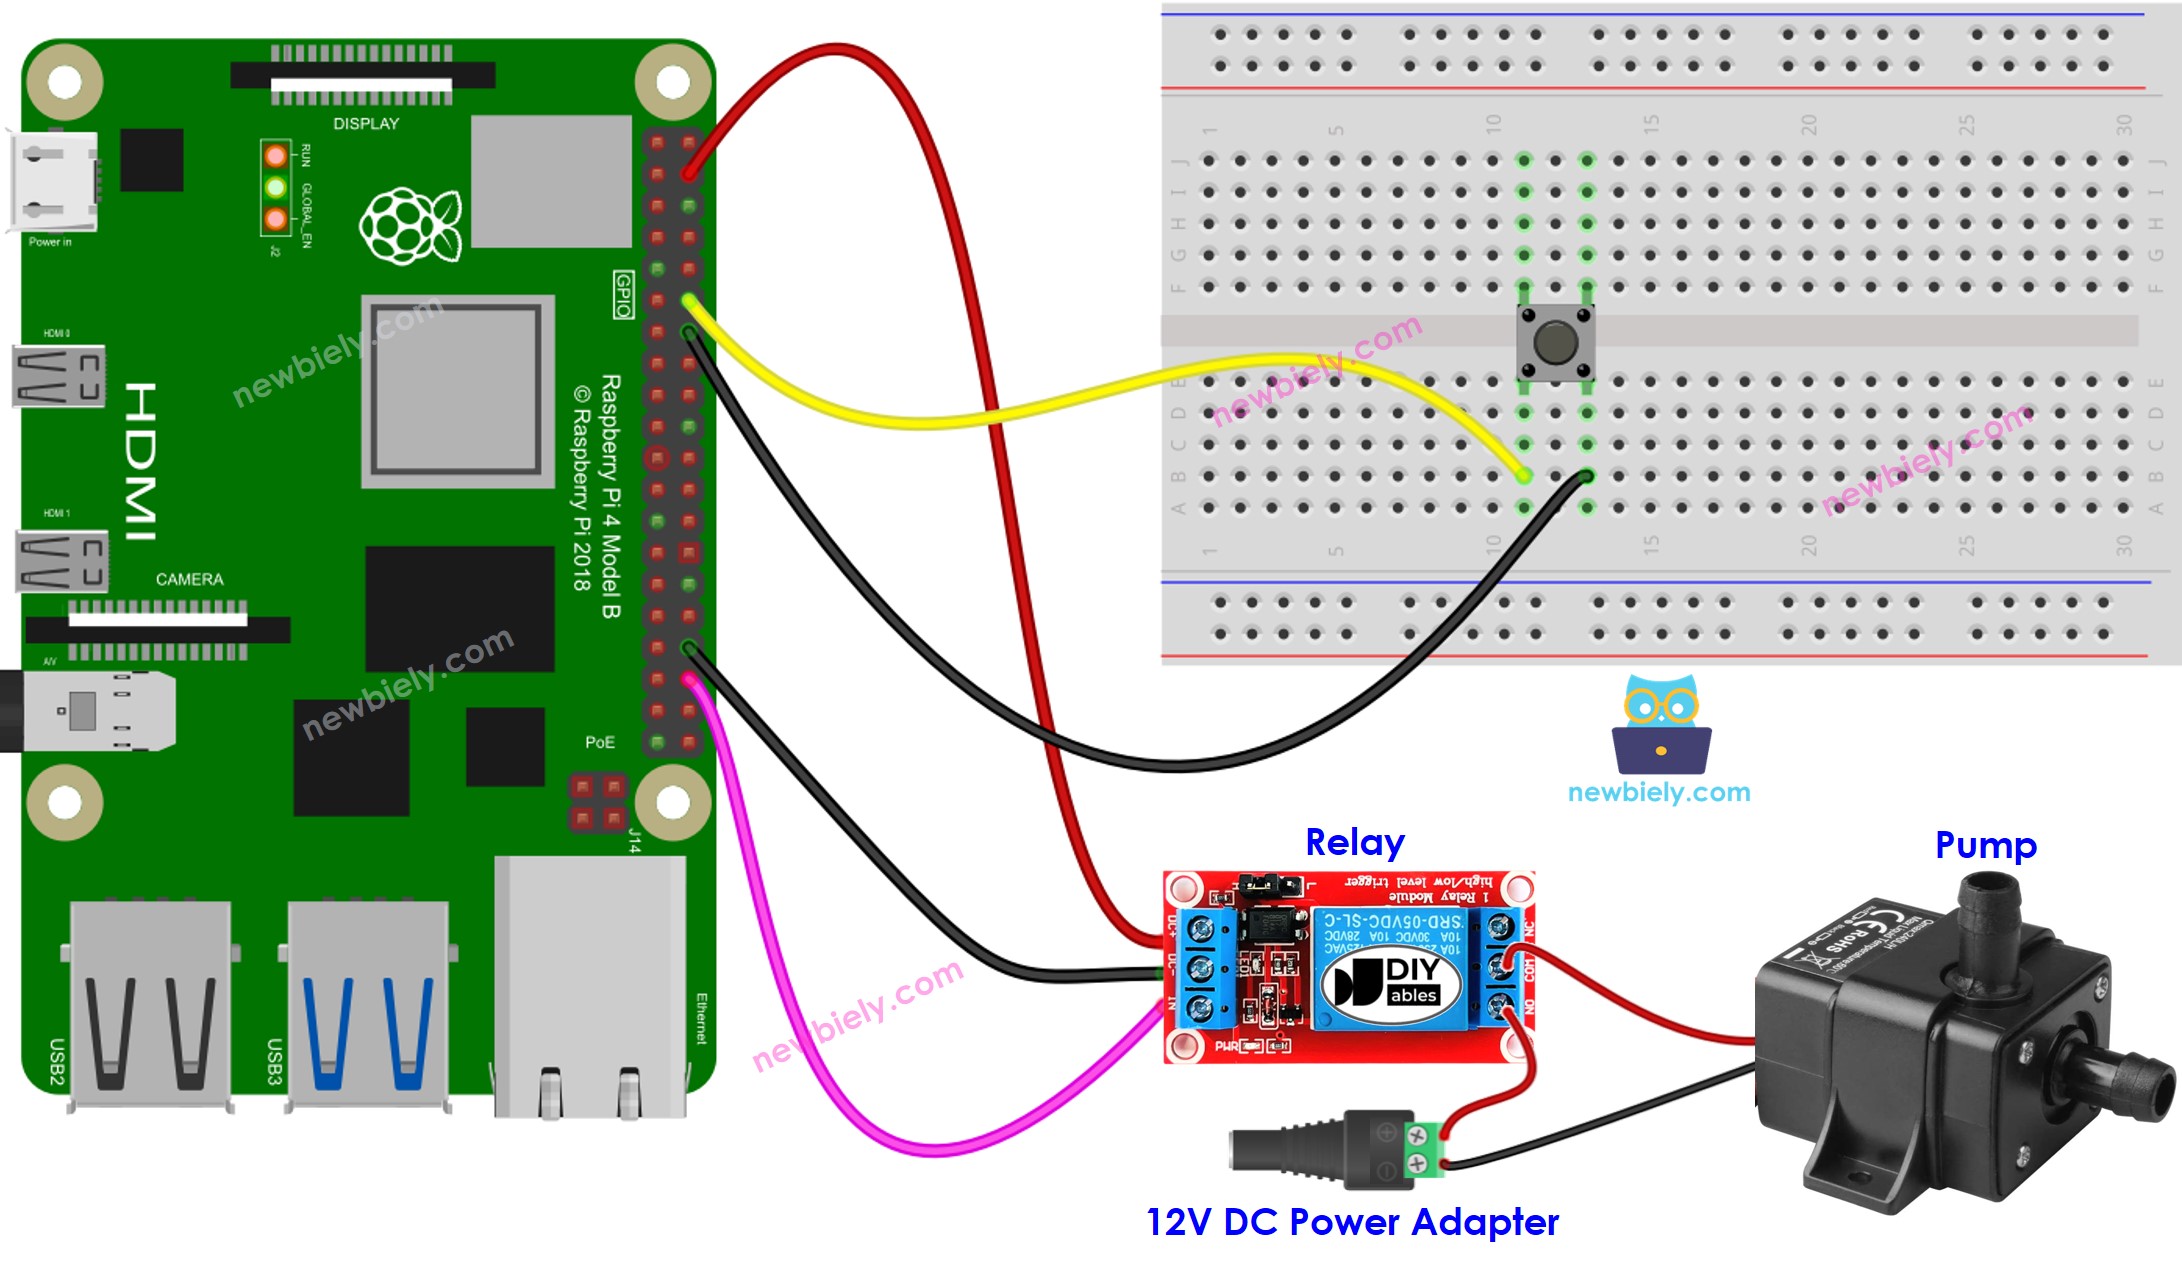 The wiring diagram between Raspberry Pi and Button controls Pump